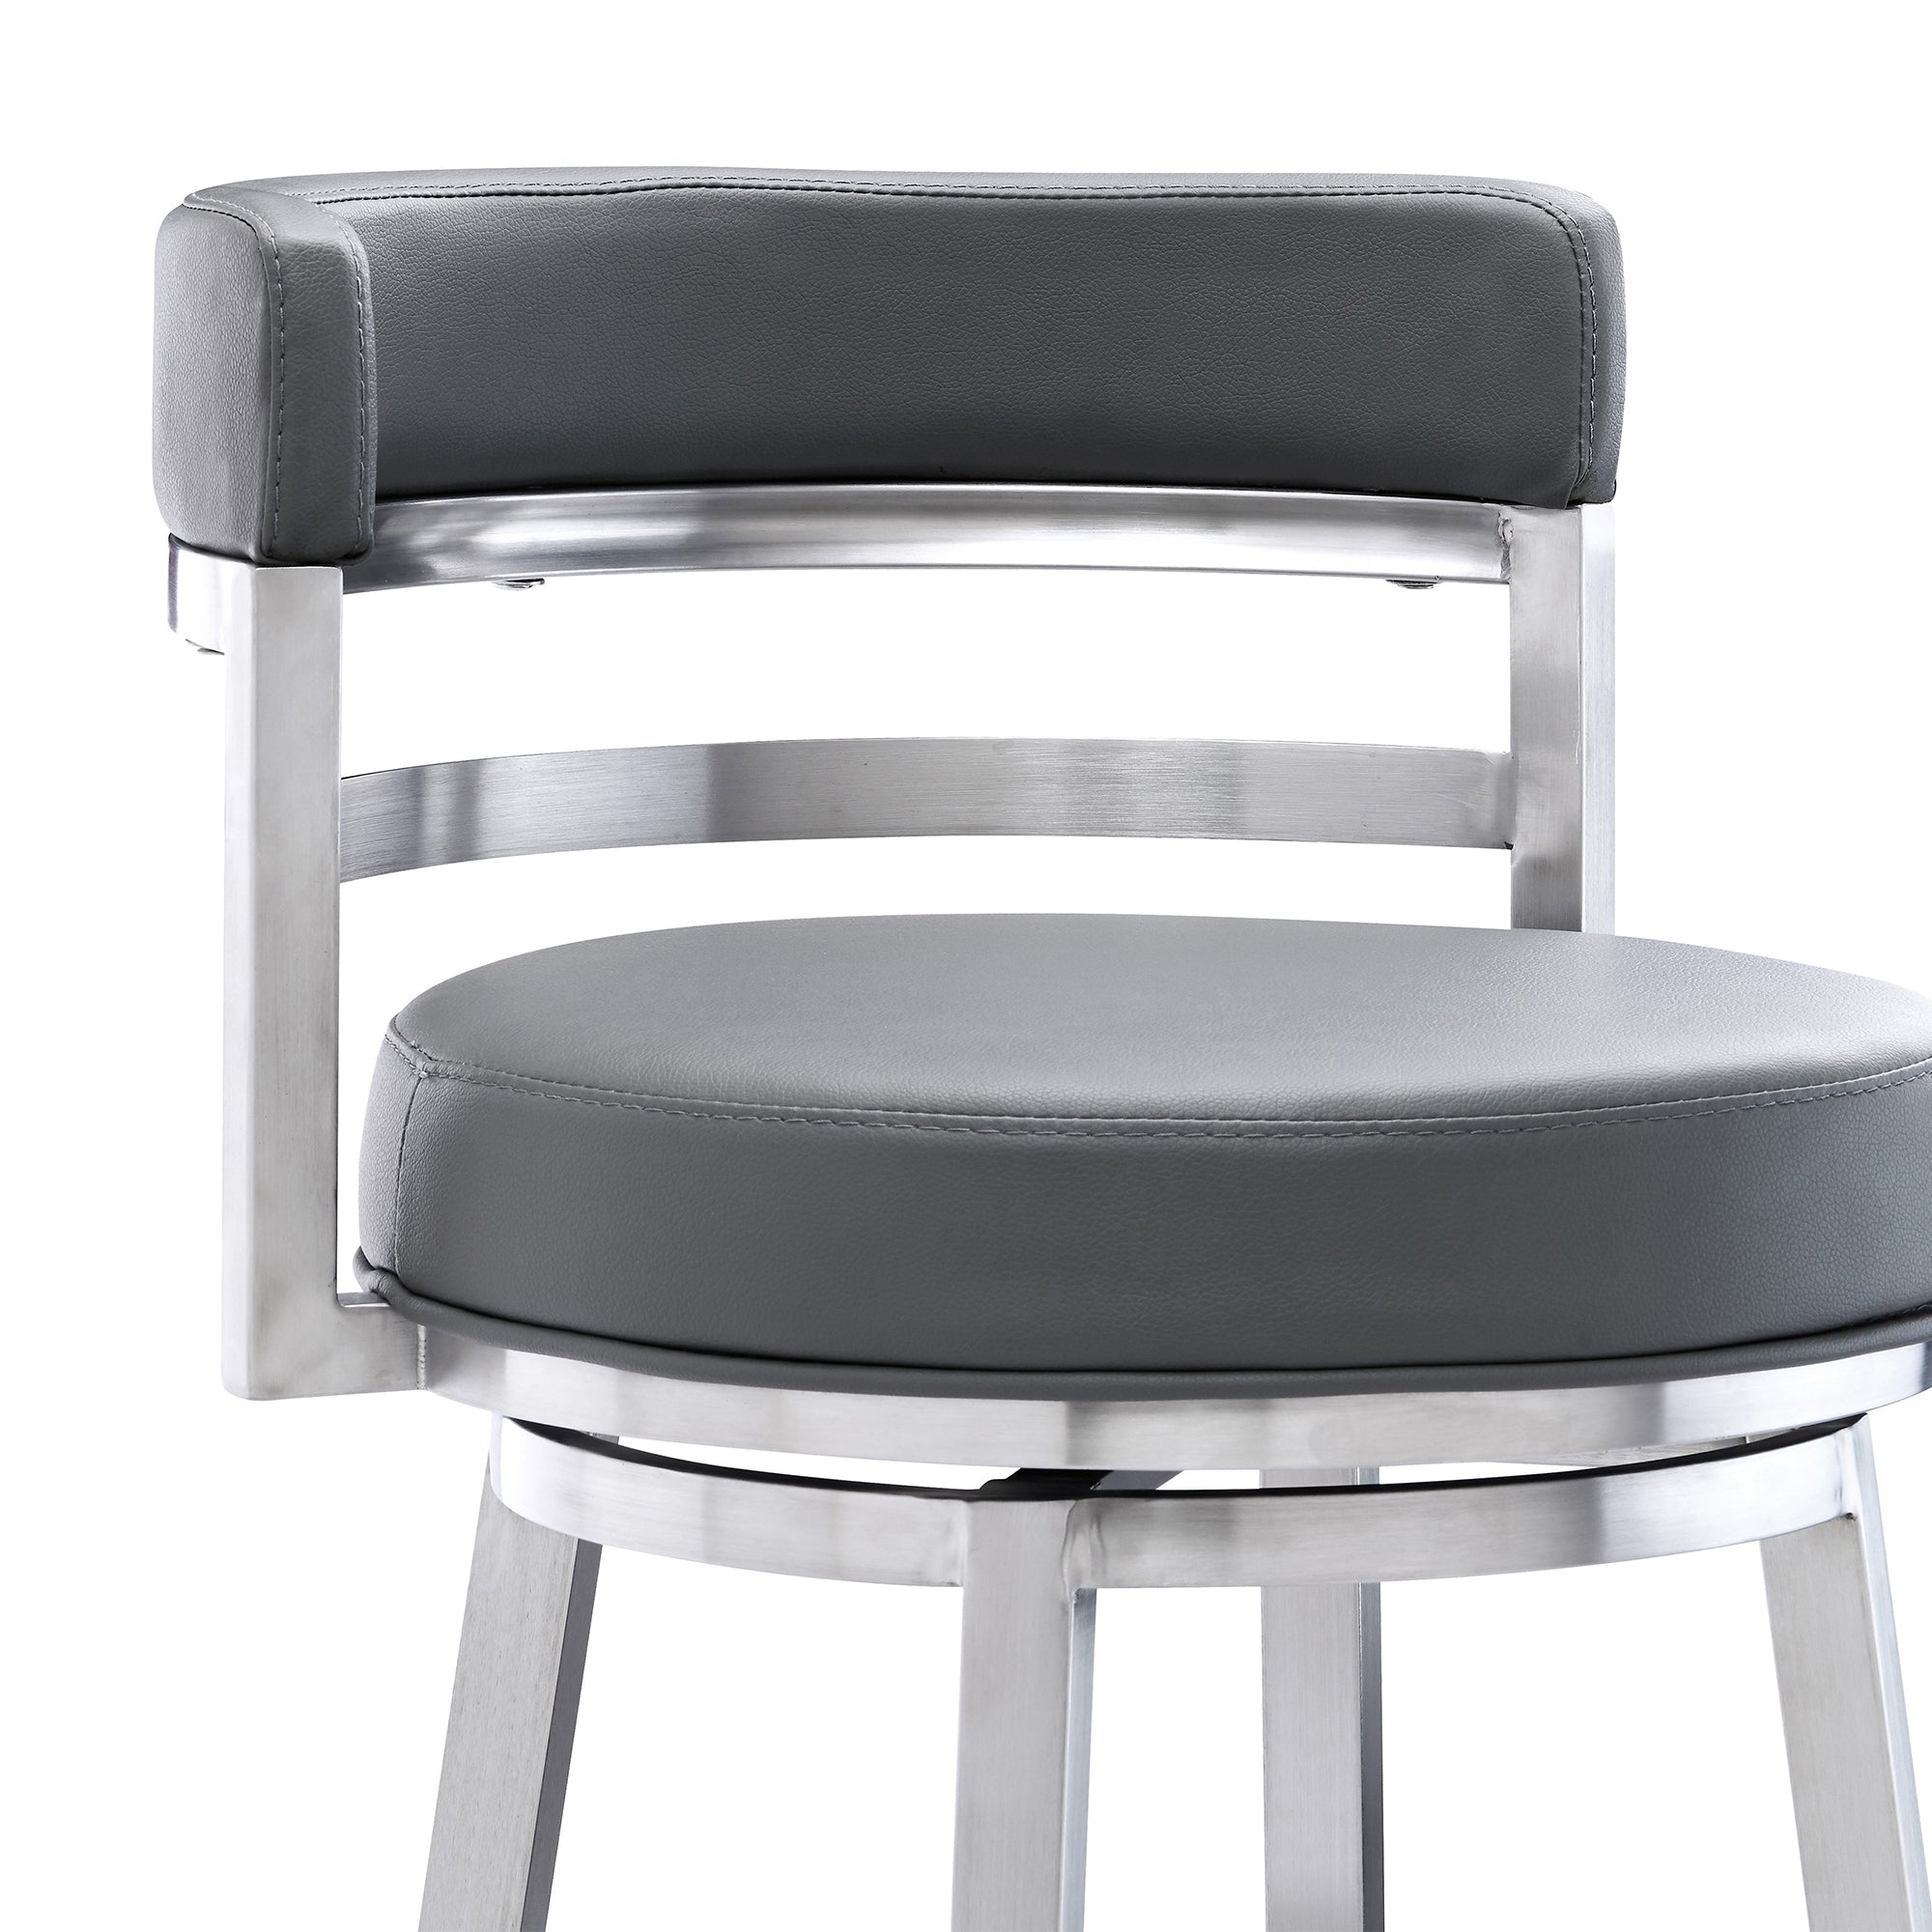 Madrid Contemporary Counter Stool or Barstool in Brushed Stainless Steel Finish and Grey Faux Leather